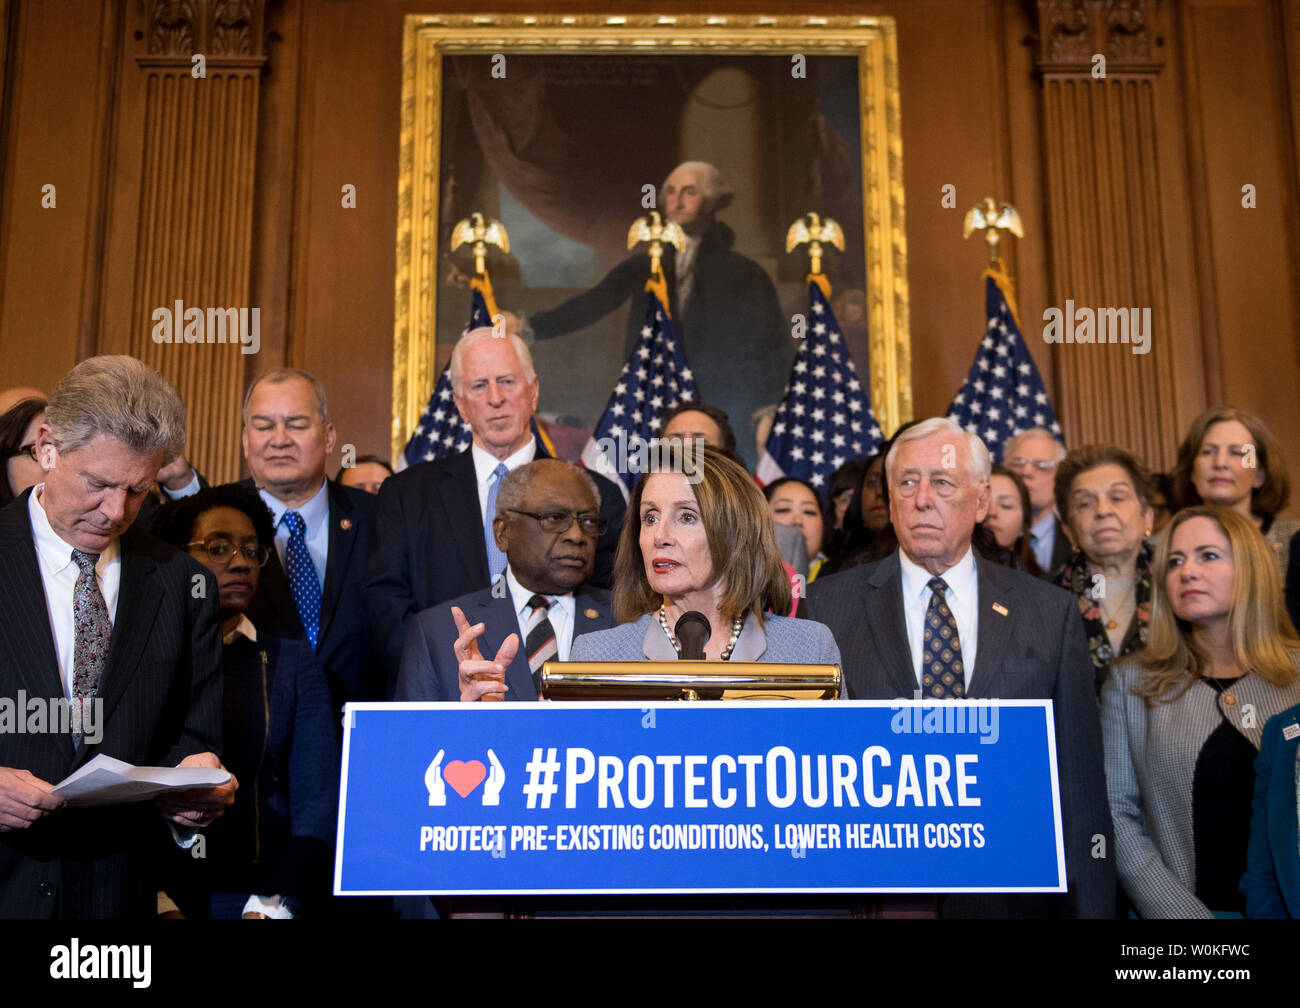 Speaker of the House Nancy Pelosi, D-CA, speaks at a press conference on introducing the Protecting Pre-existing Conditions and Making Health Care More Affordable Act of 2019, that aims to protect the coverage of pre-existing conditions which was recently challenged in the court systems, on Capitol Hill in Washington, D.C. on March 26, 2019. Photo by Kevin Dietsch/UPI Stock Photo